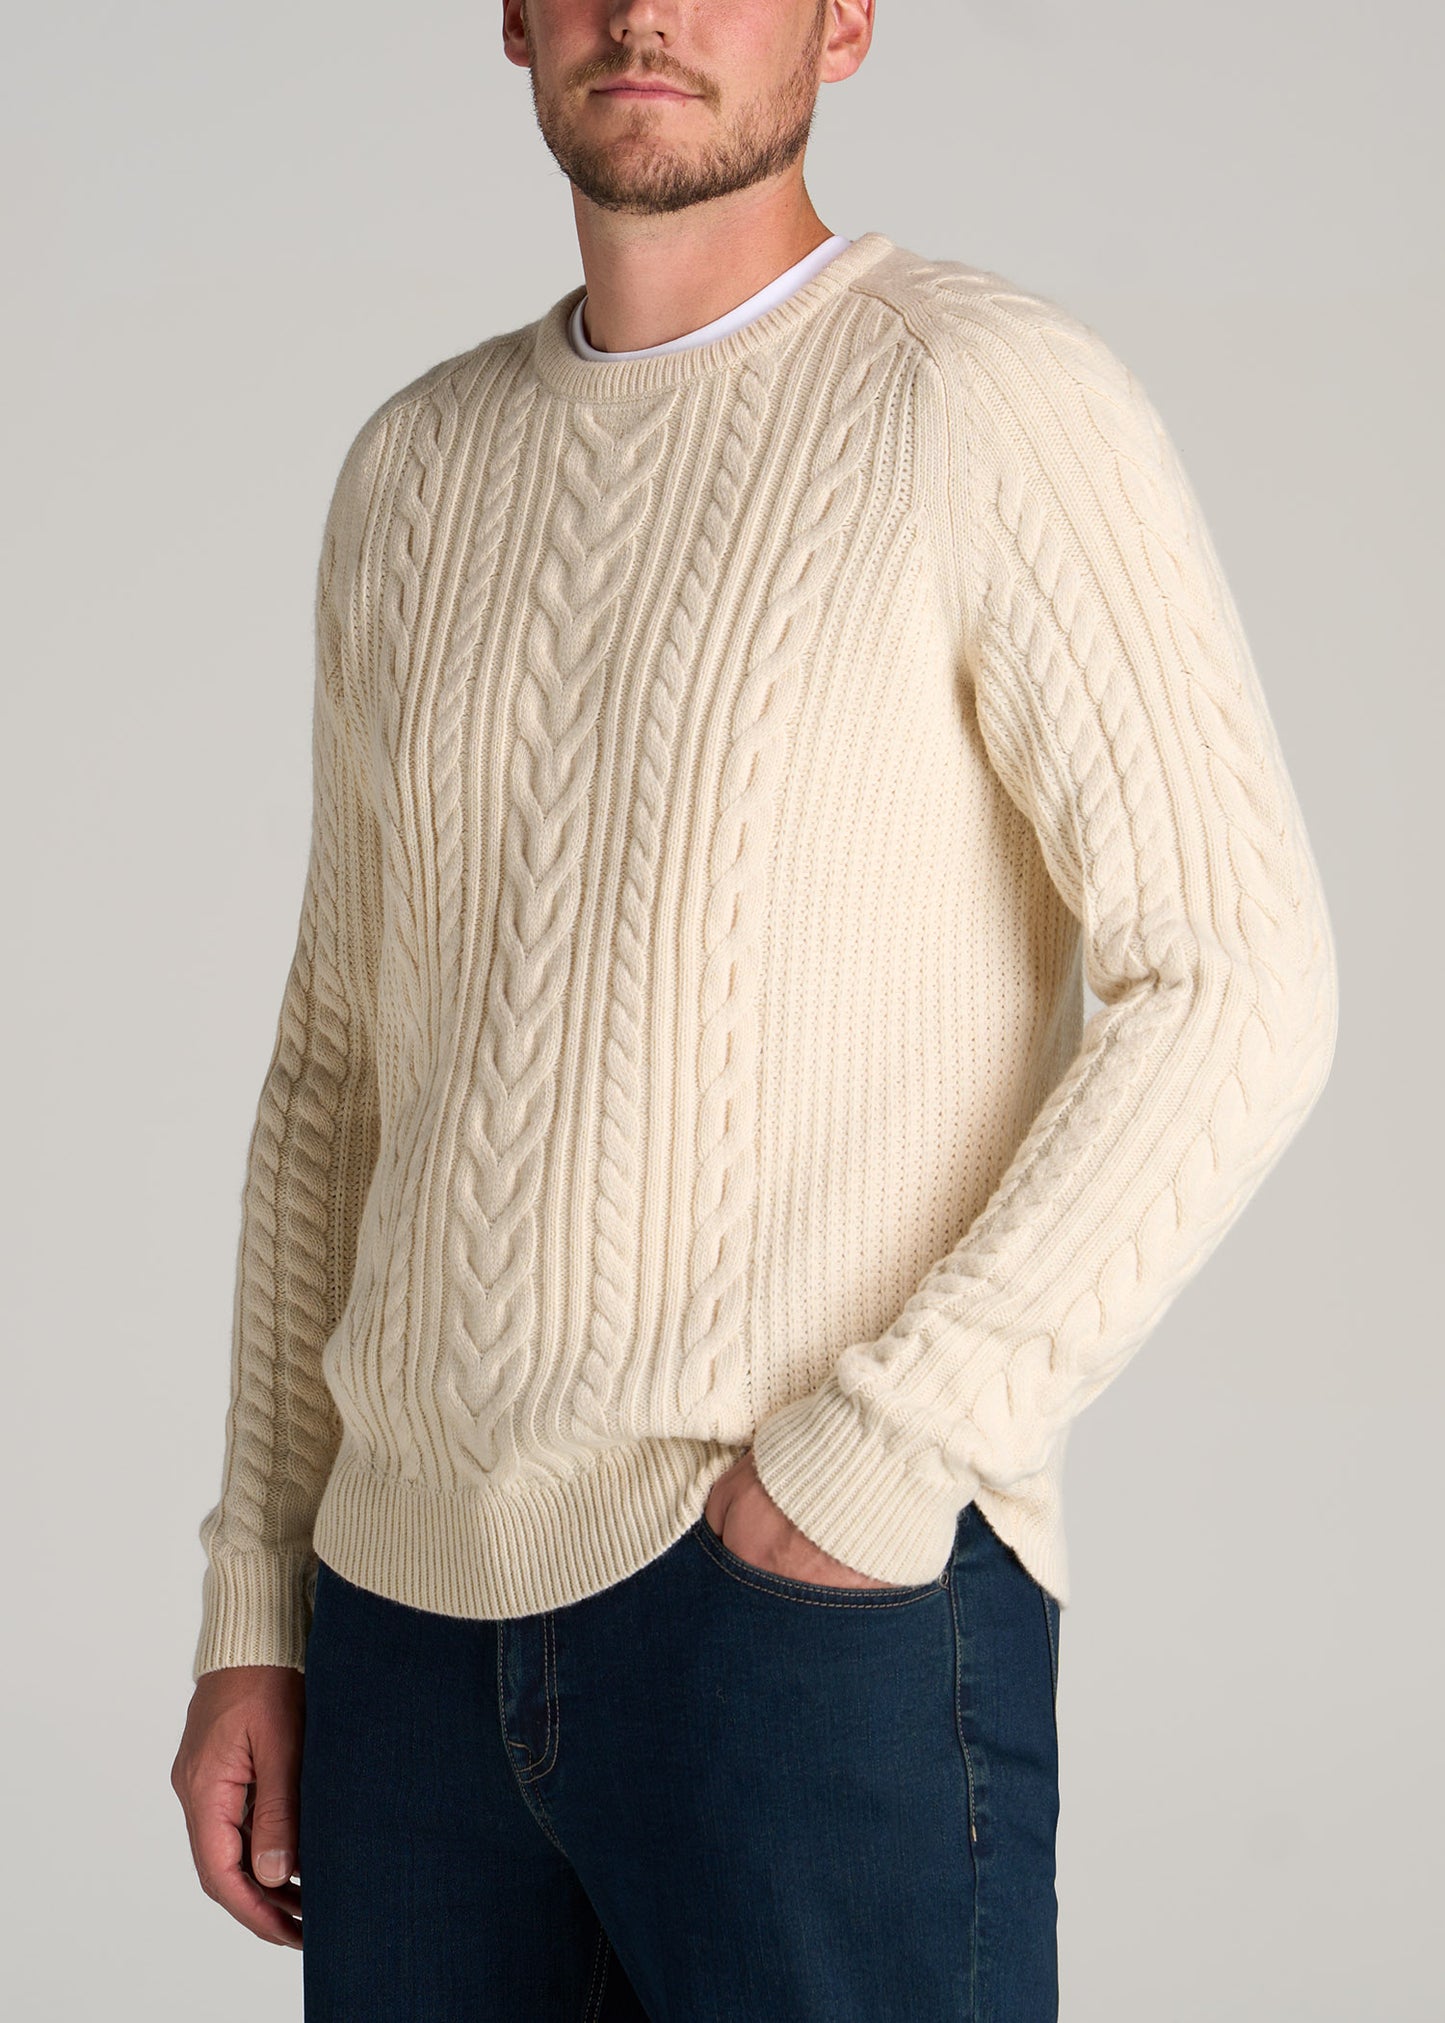    American-Tall-Men-Heavy-Cable-Knit-Sweater-Almond-side